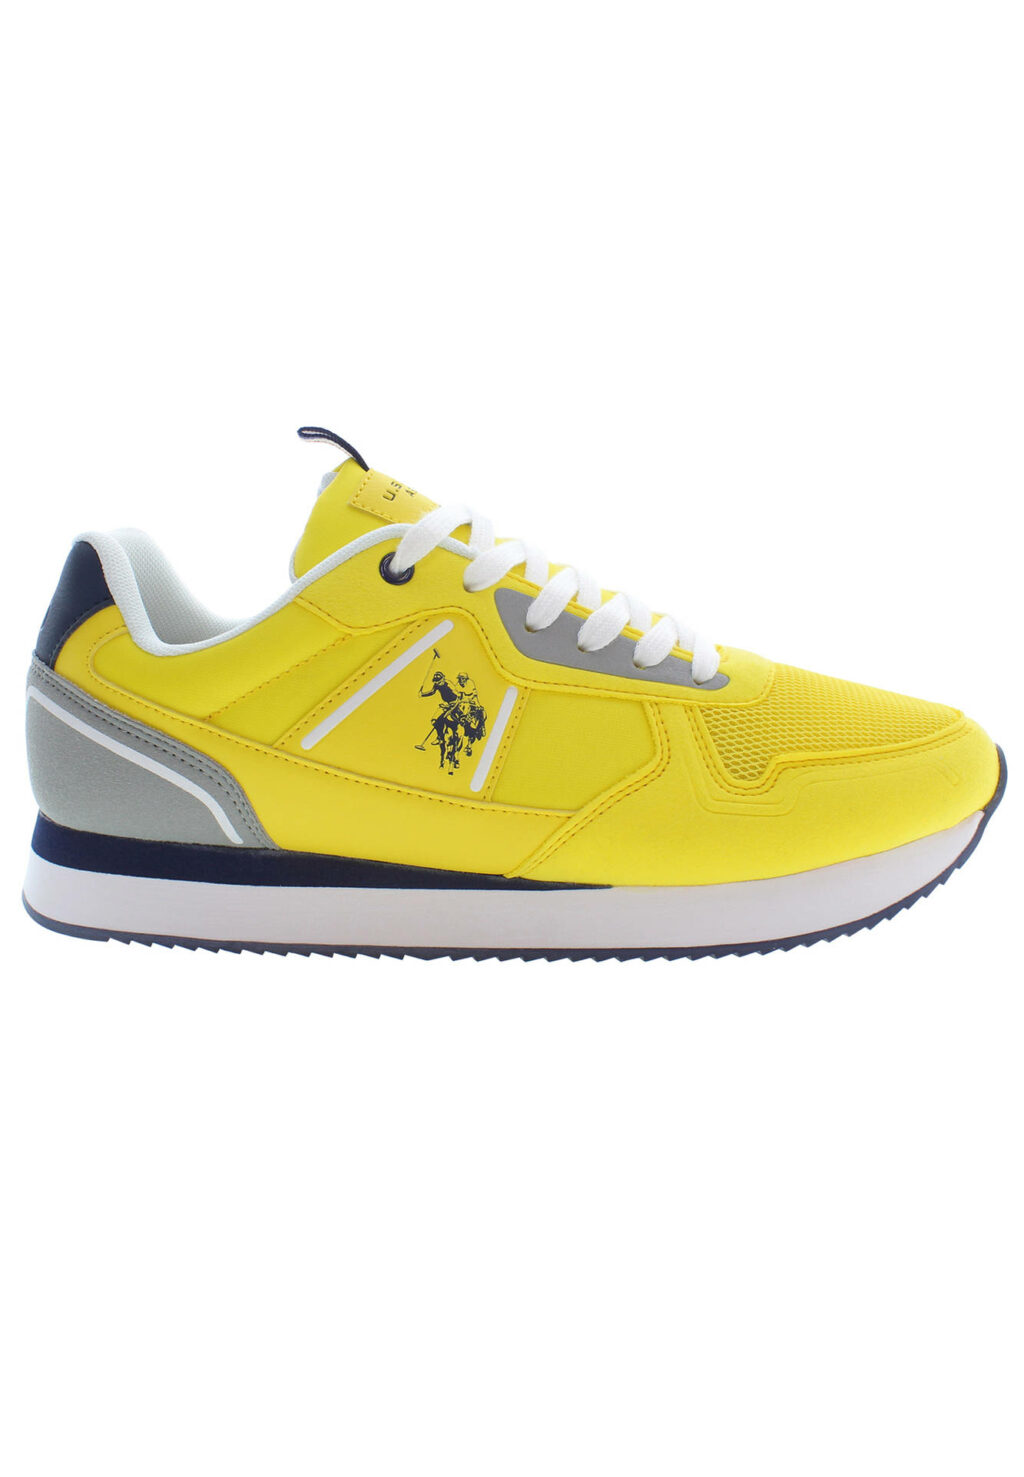 US POLO BEST PRICE YELLOW MAN SPORT SHOES NOBIL004M3HT3_GIALLO_YEL